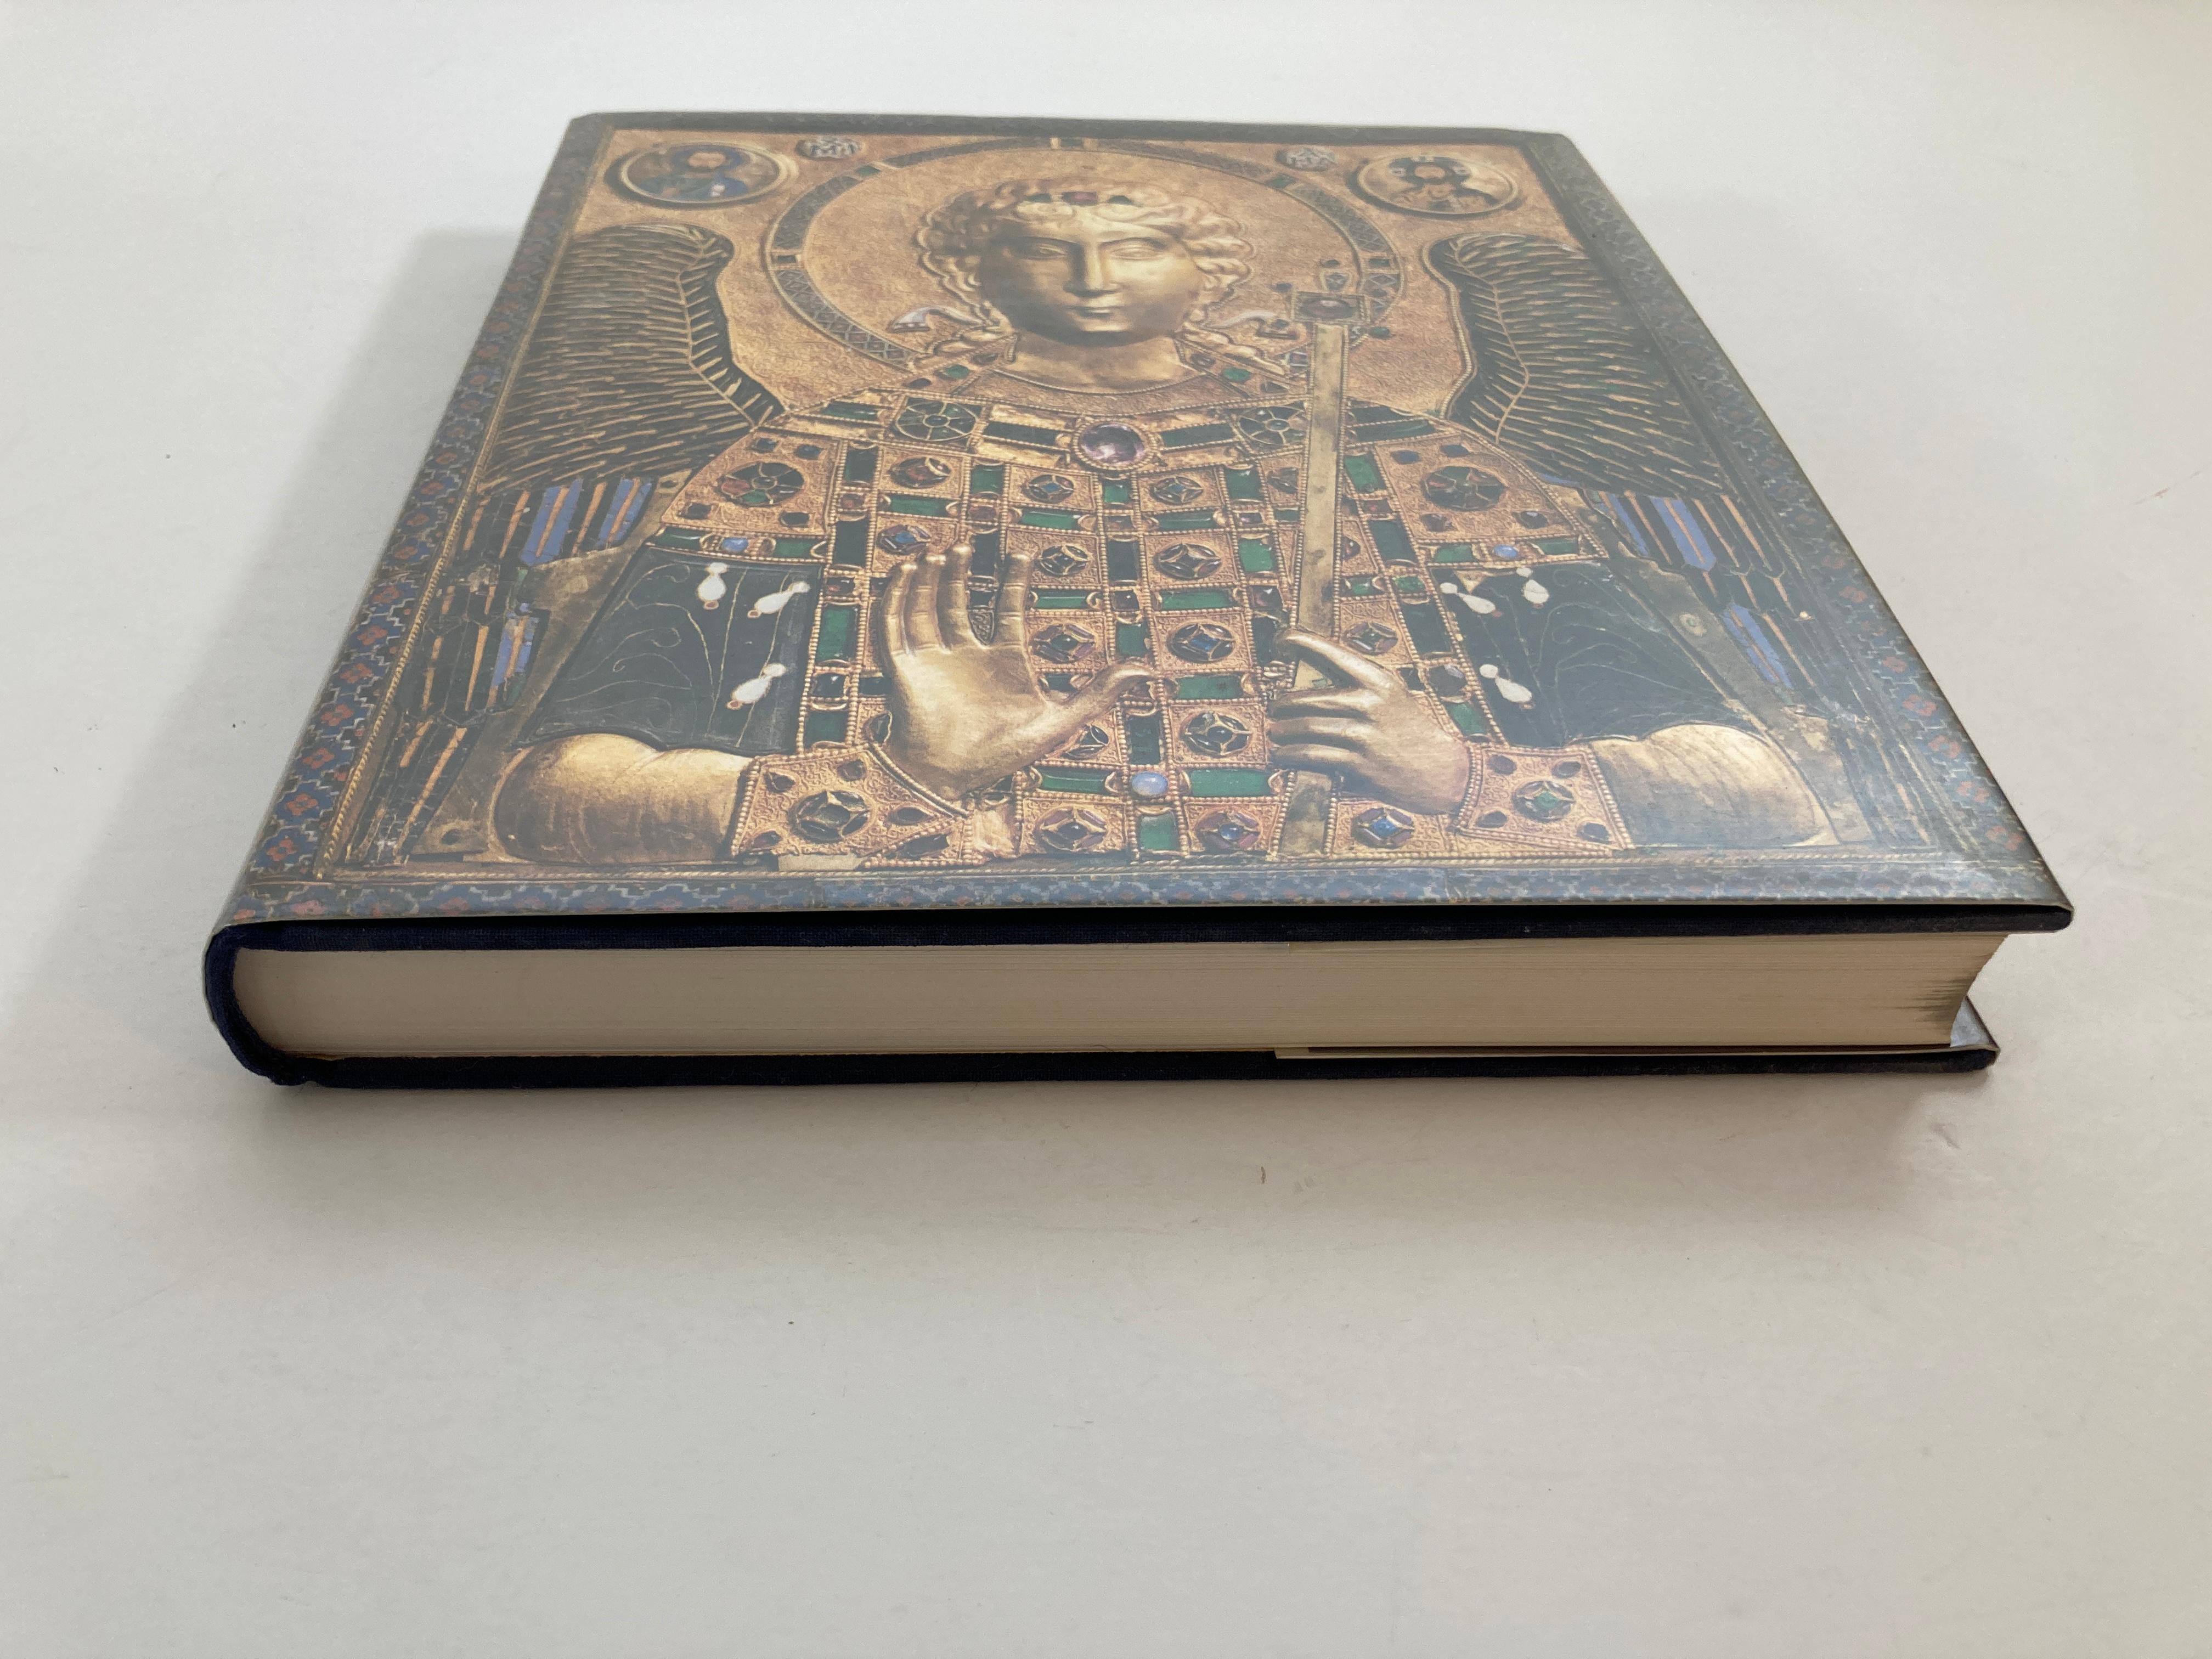 Italian The Treasury of San Marco, Venice First Edition by David Buckton Hardcover Book For Sale